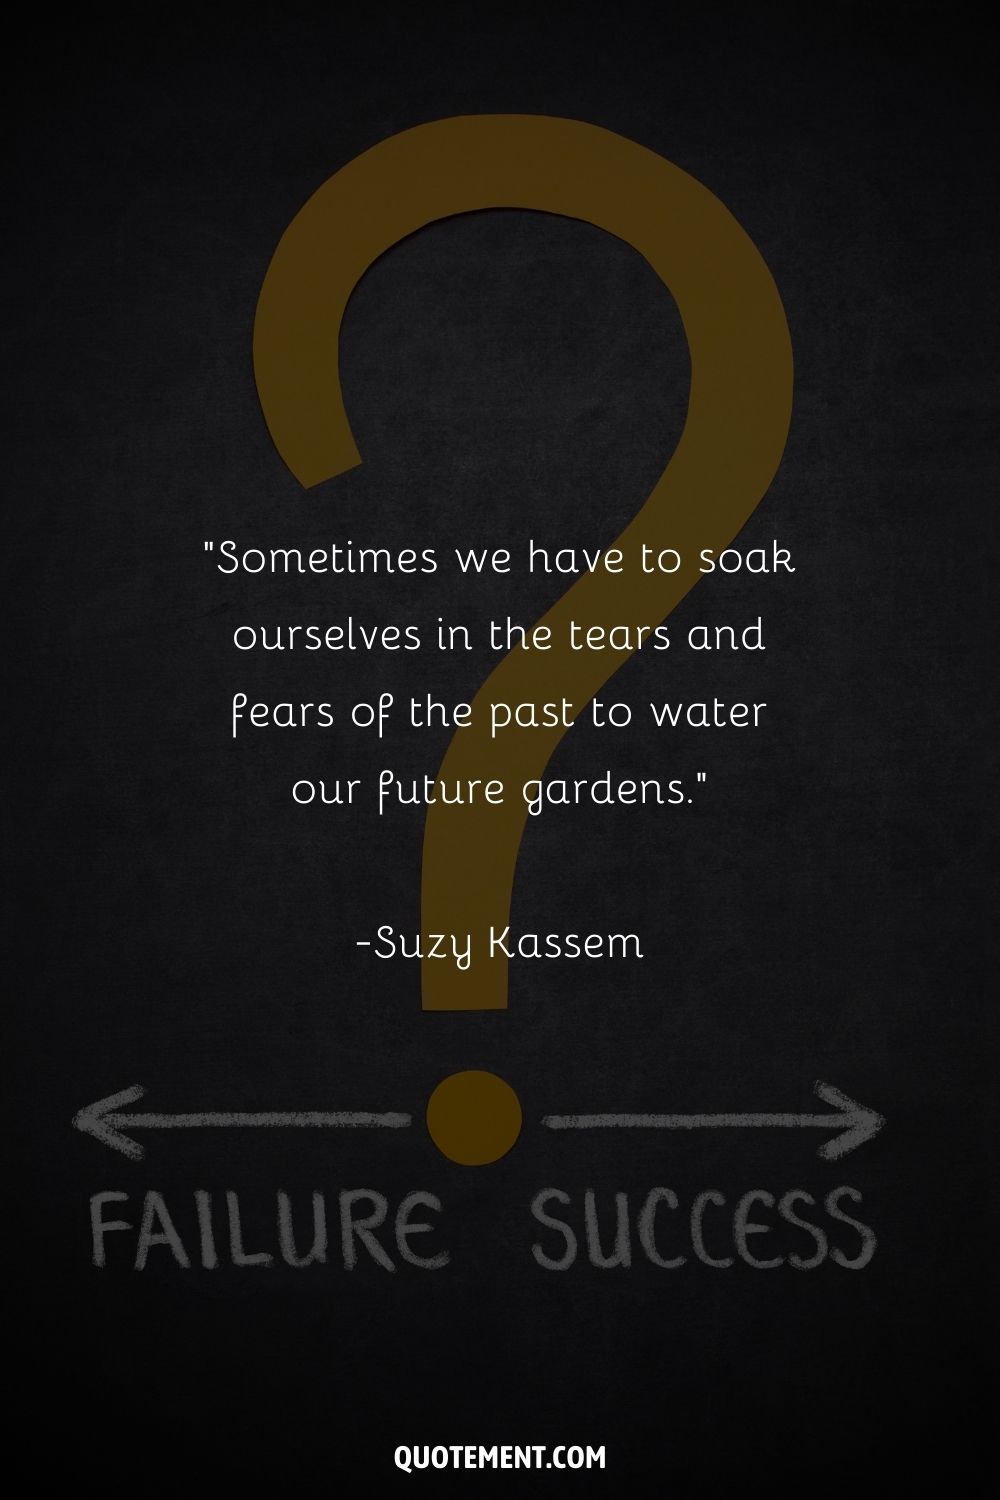 “Sometimes we have to soak ourselves in the tears and fears of the past to water our future gardens.”